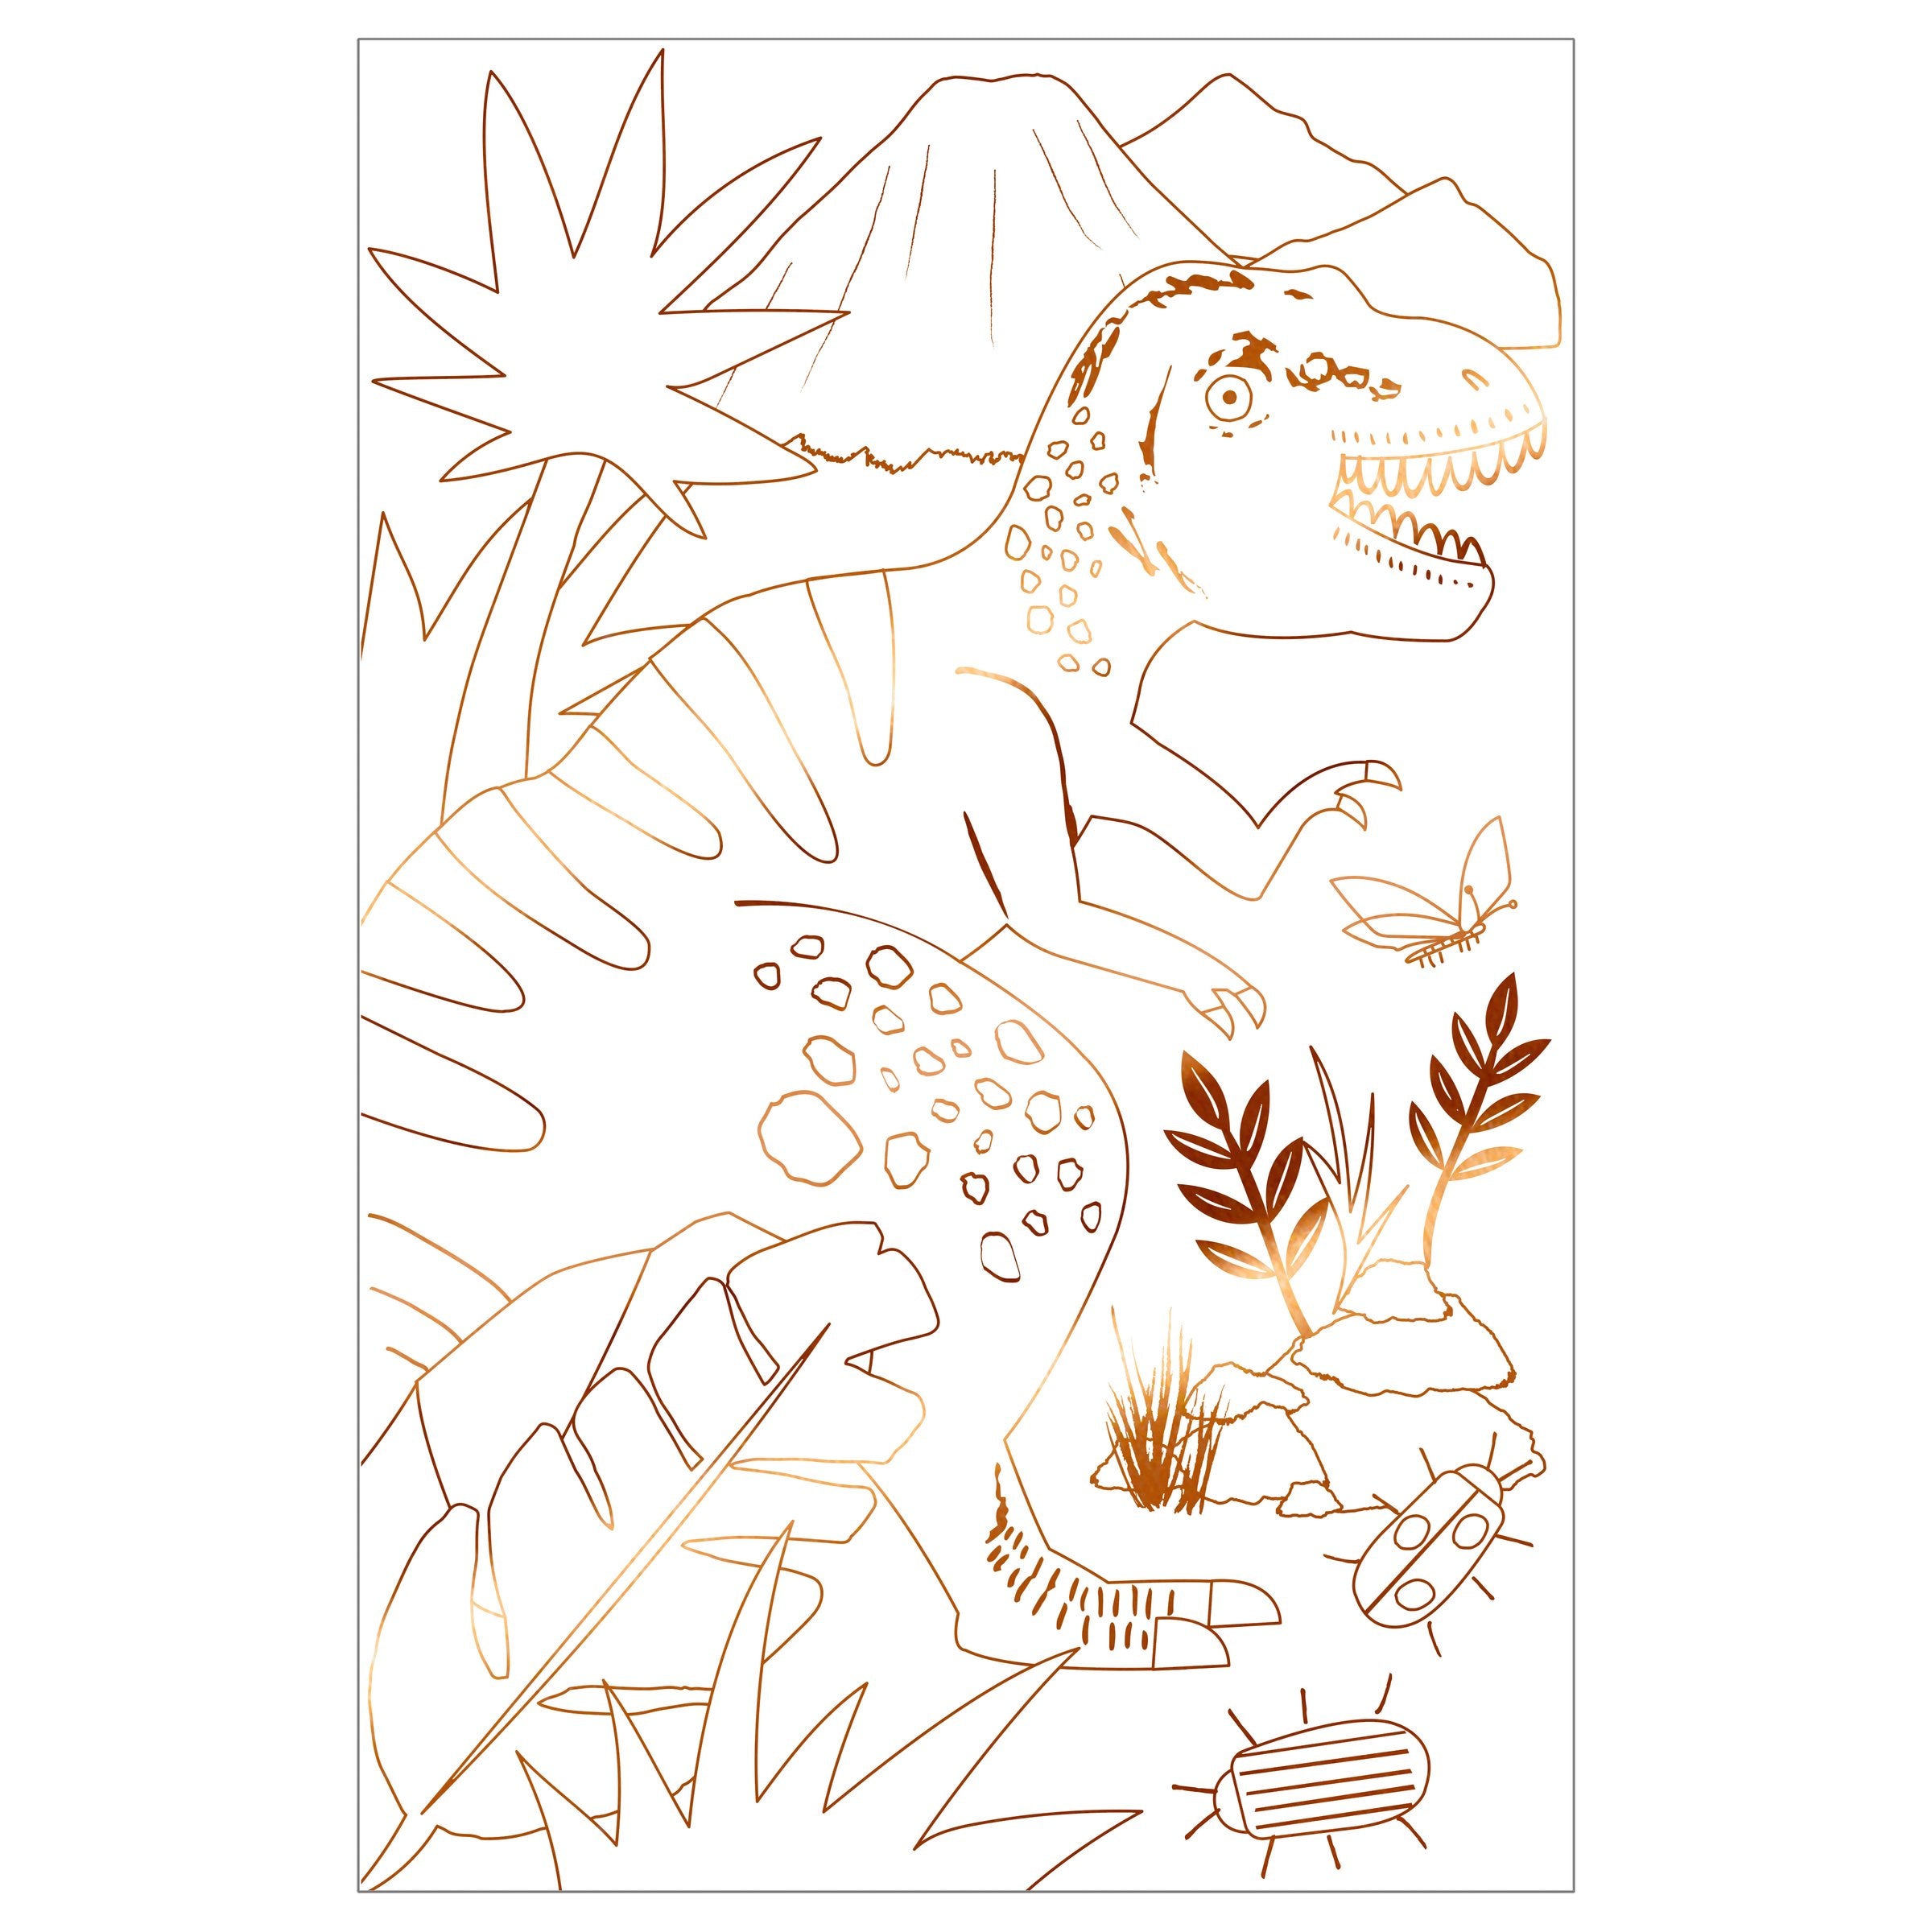 Kids who love dinosaur craft activities will adore our coloring posters, with dinosaur designs, for hours of fun.